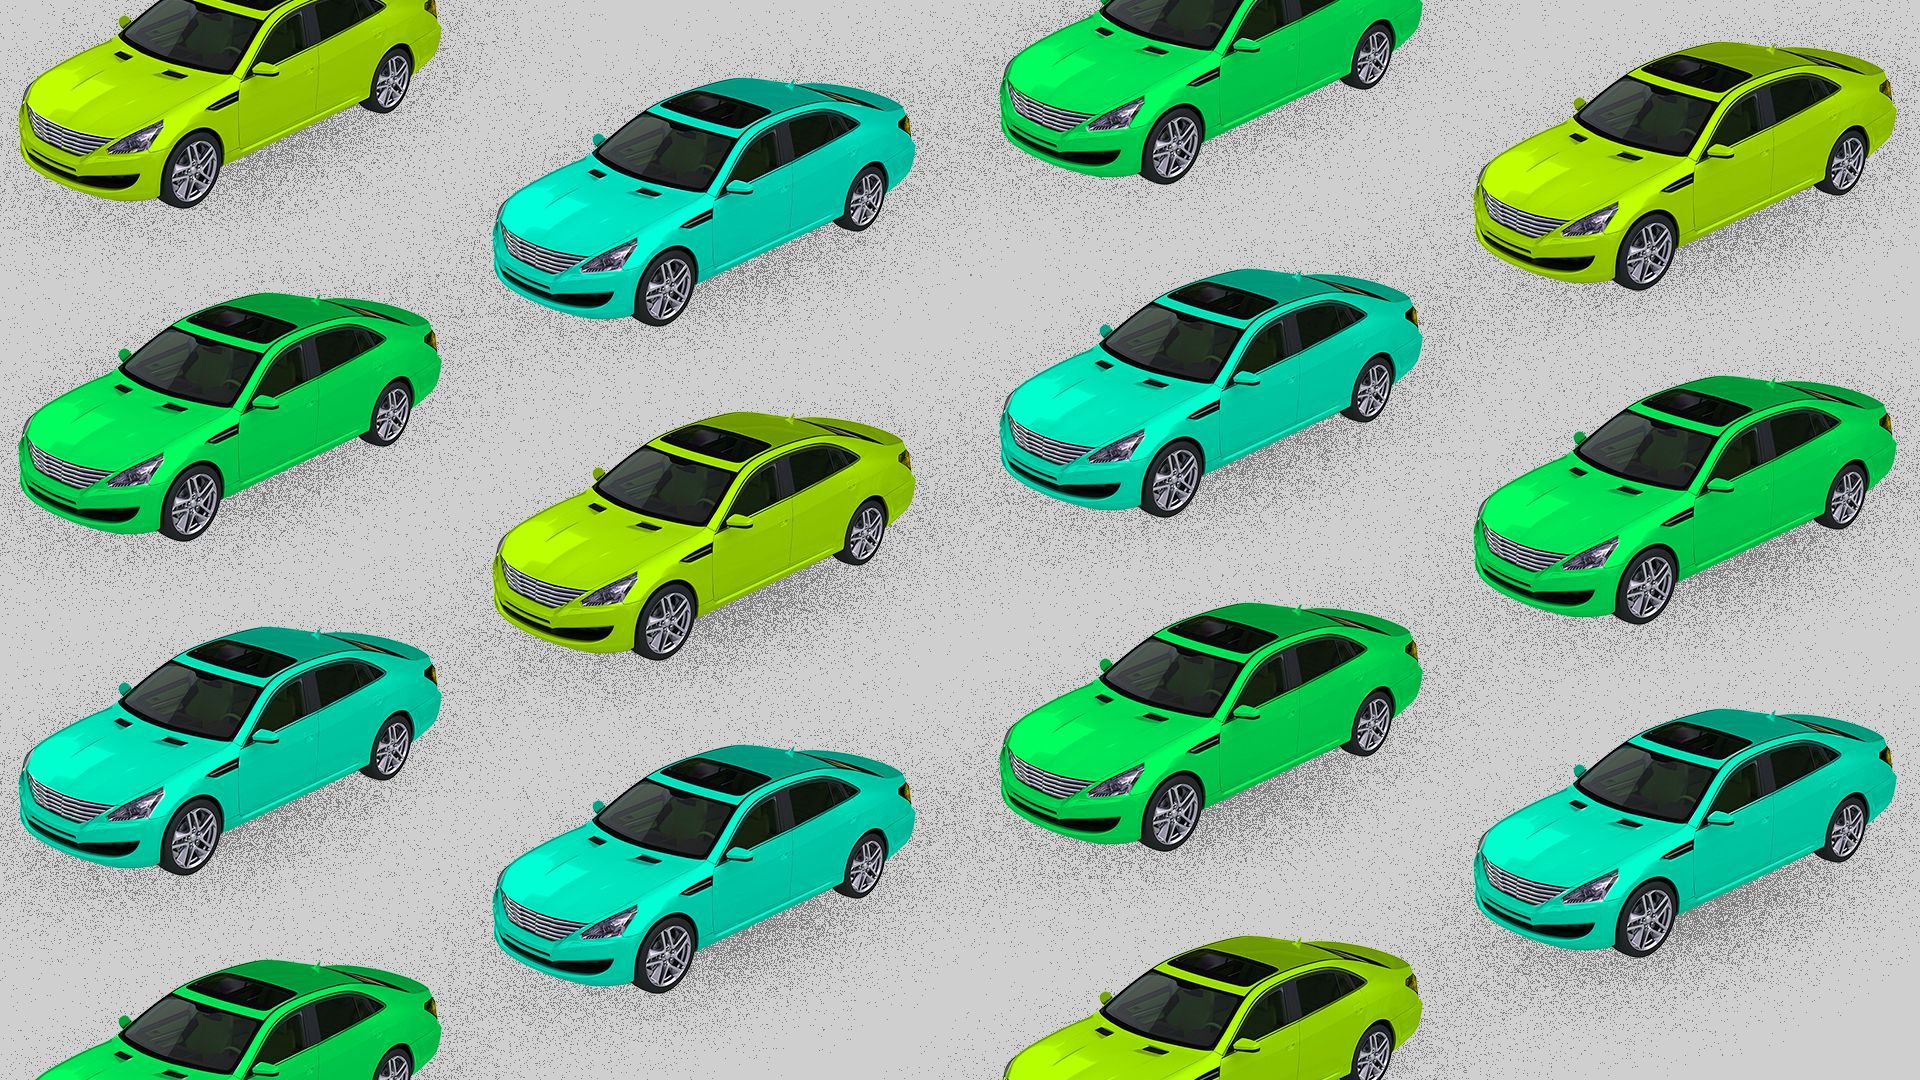 Illustration of a pattern of cars in varying green colors